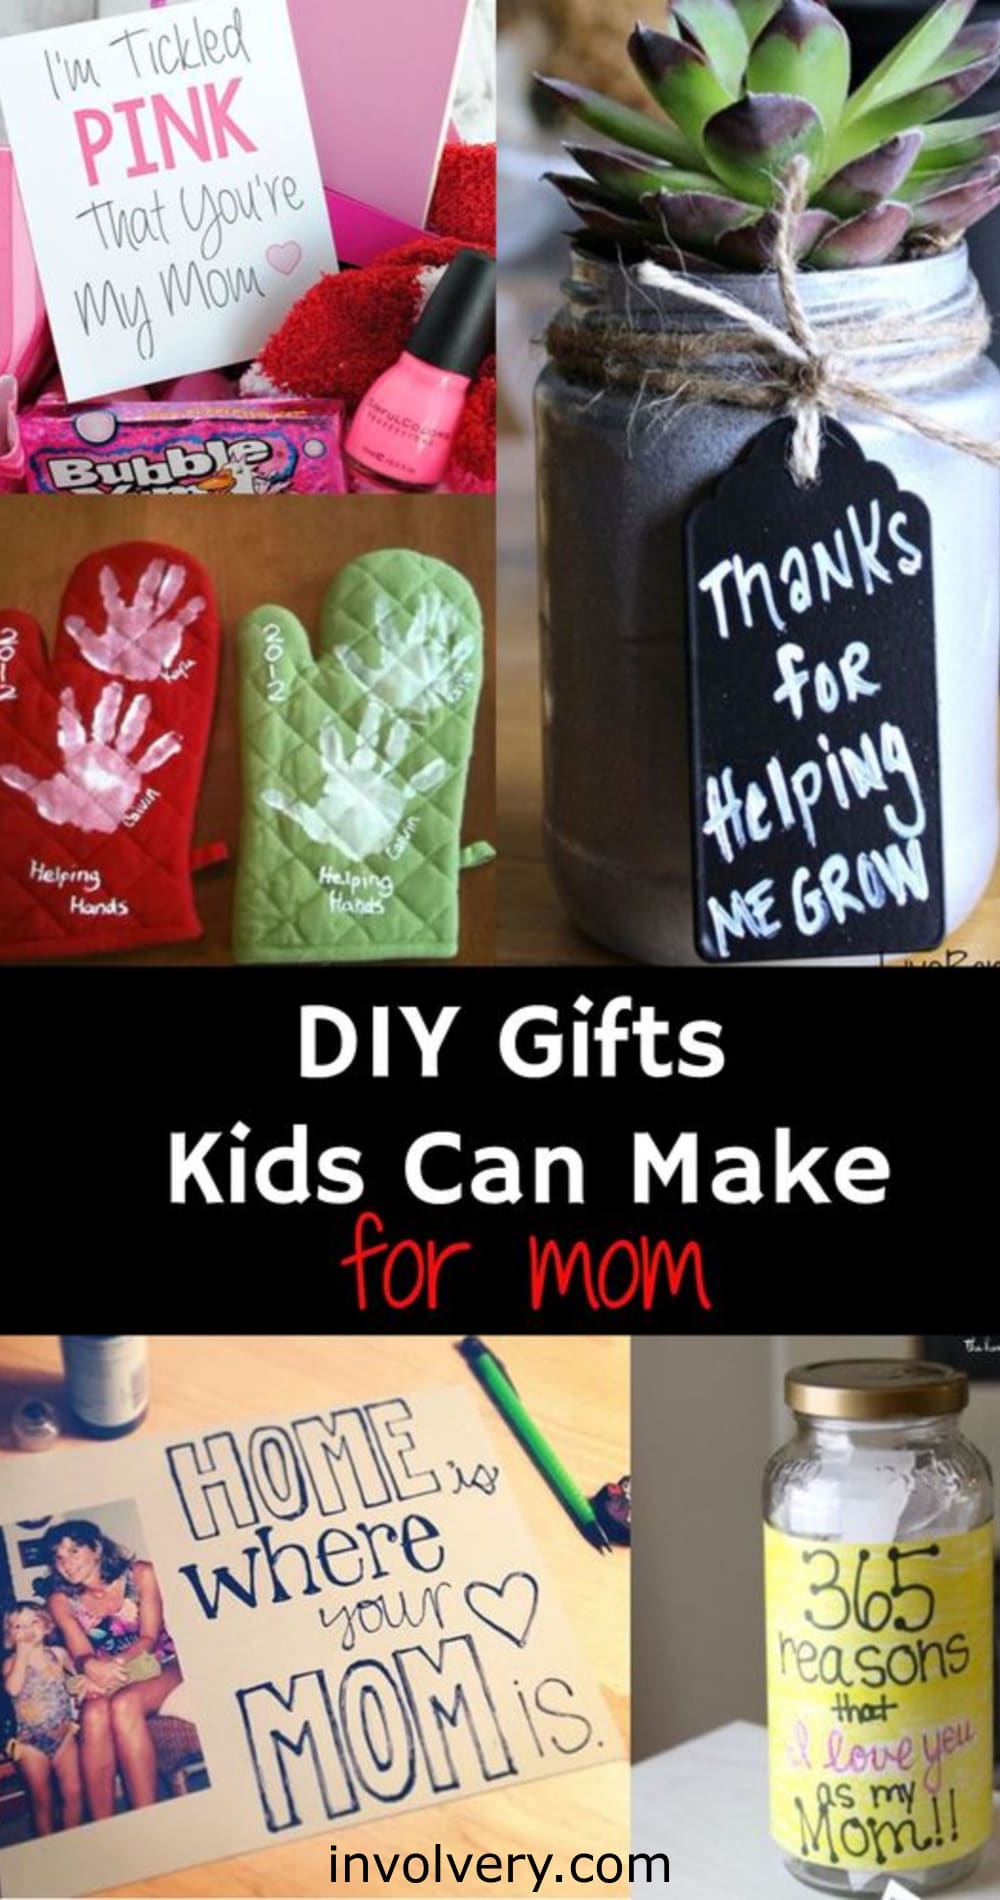 DIY gifts kids can make for mom on Mother's Day Or Her Birthday